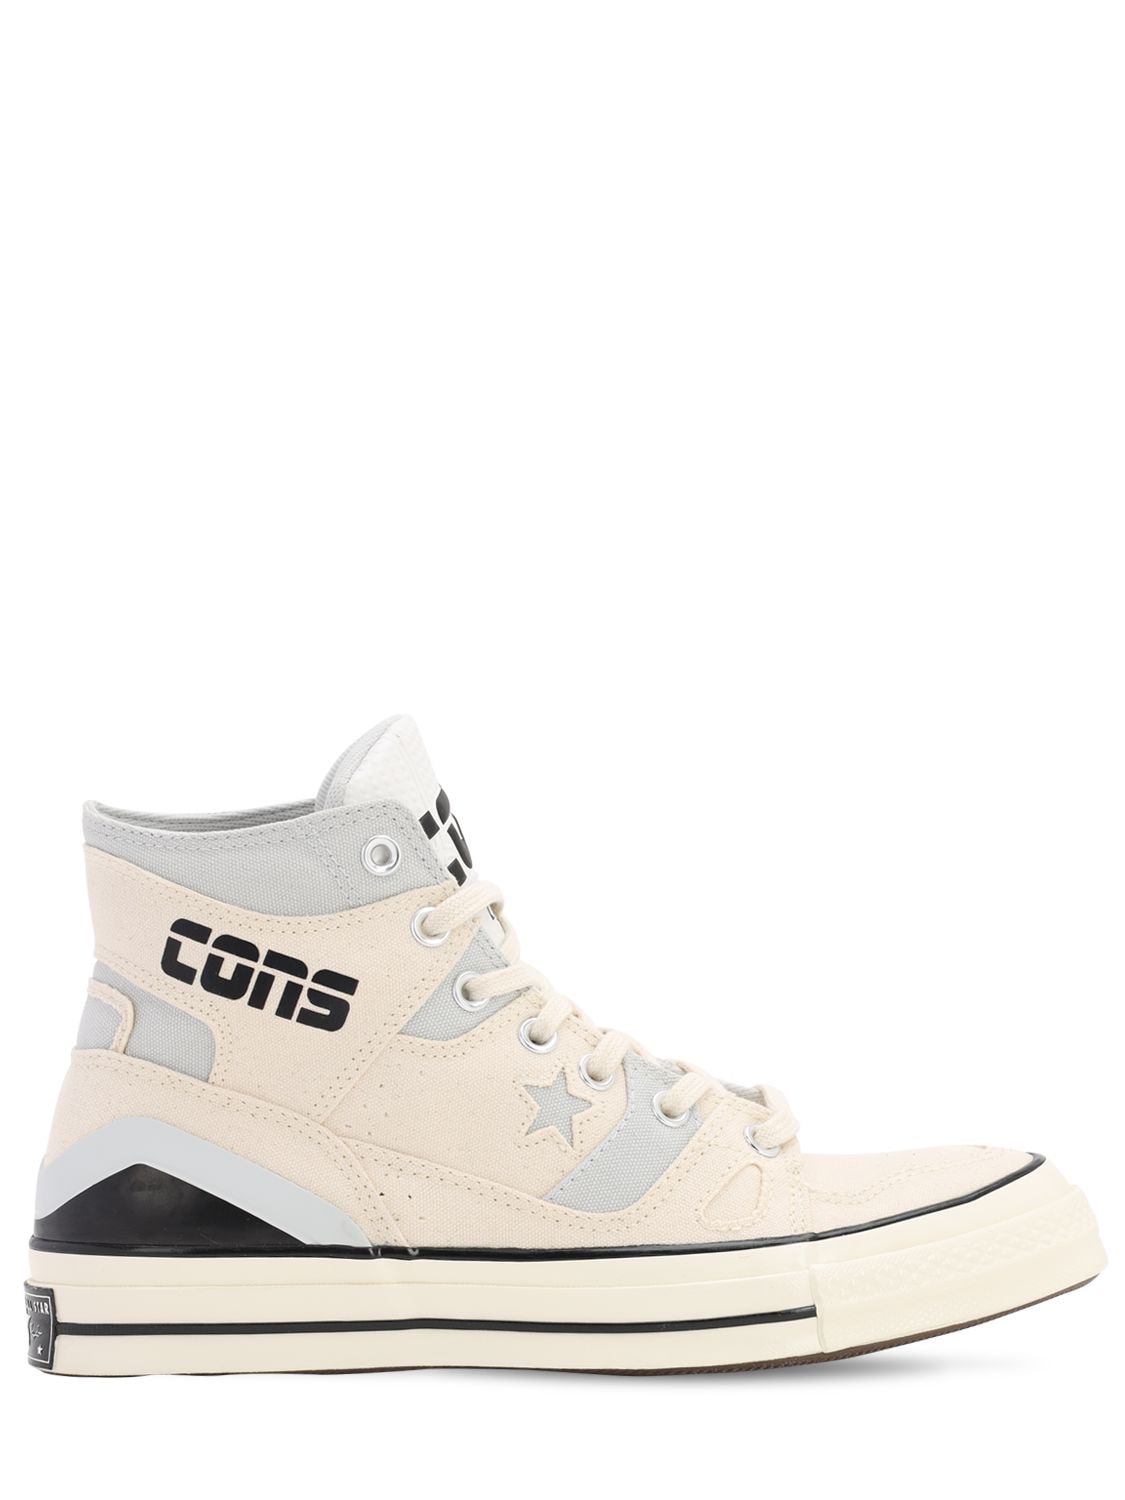 Image of Chuck Taylor 70 "erx" Sneakers